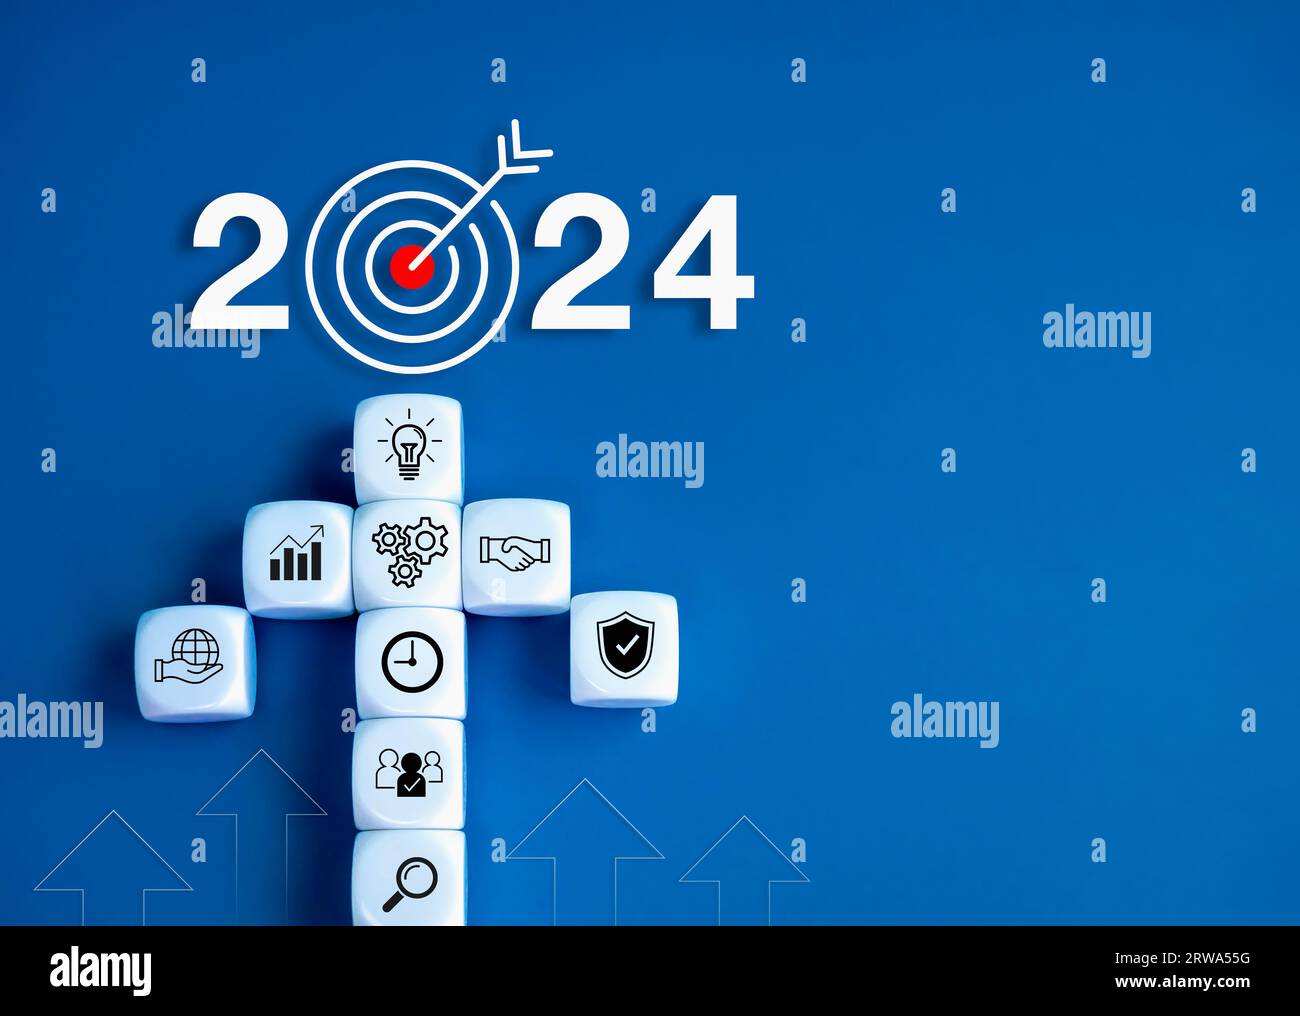 2024 leadership business goal concept. 2024 year number with target ...